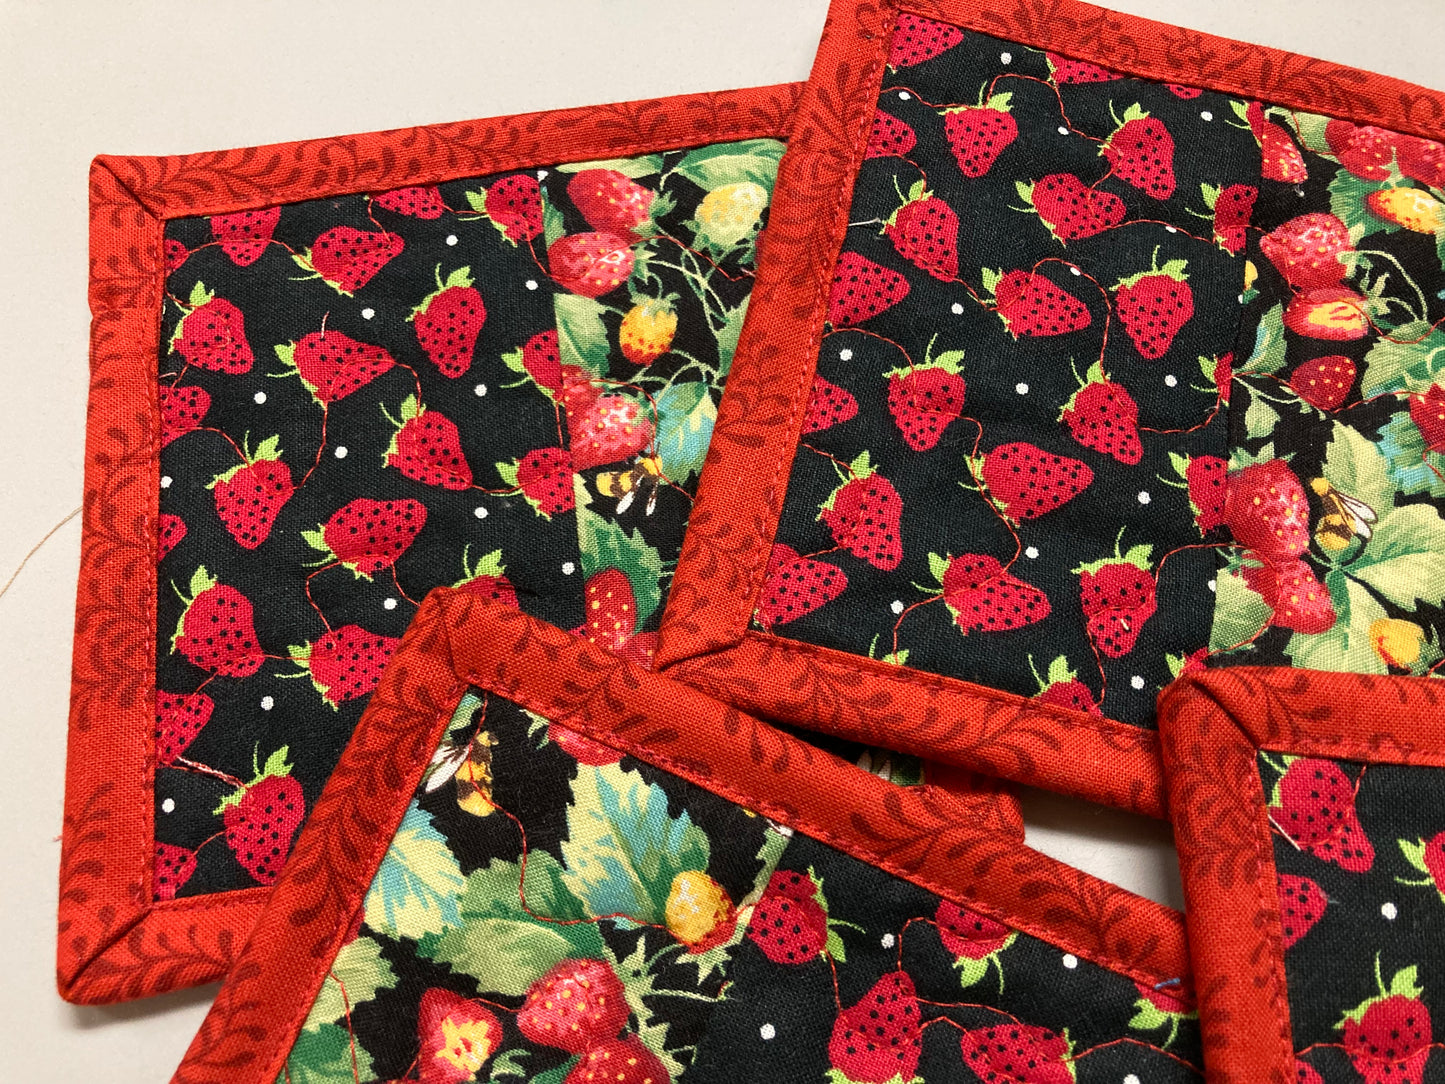 Strawberries and Honey Bees Quilted Fabric Coasters, Mug Rugs Snacks 5x5" Hot Cold Food Drinks, Washable Reversible Handmade Spring Summer